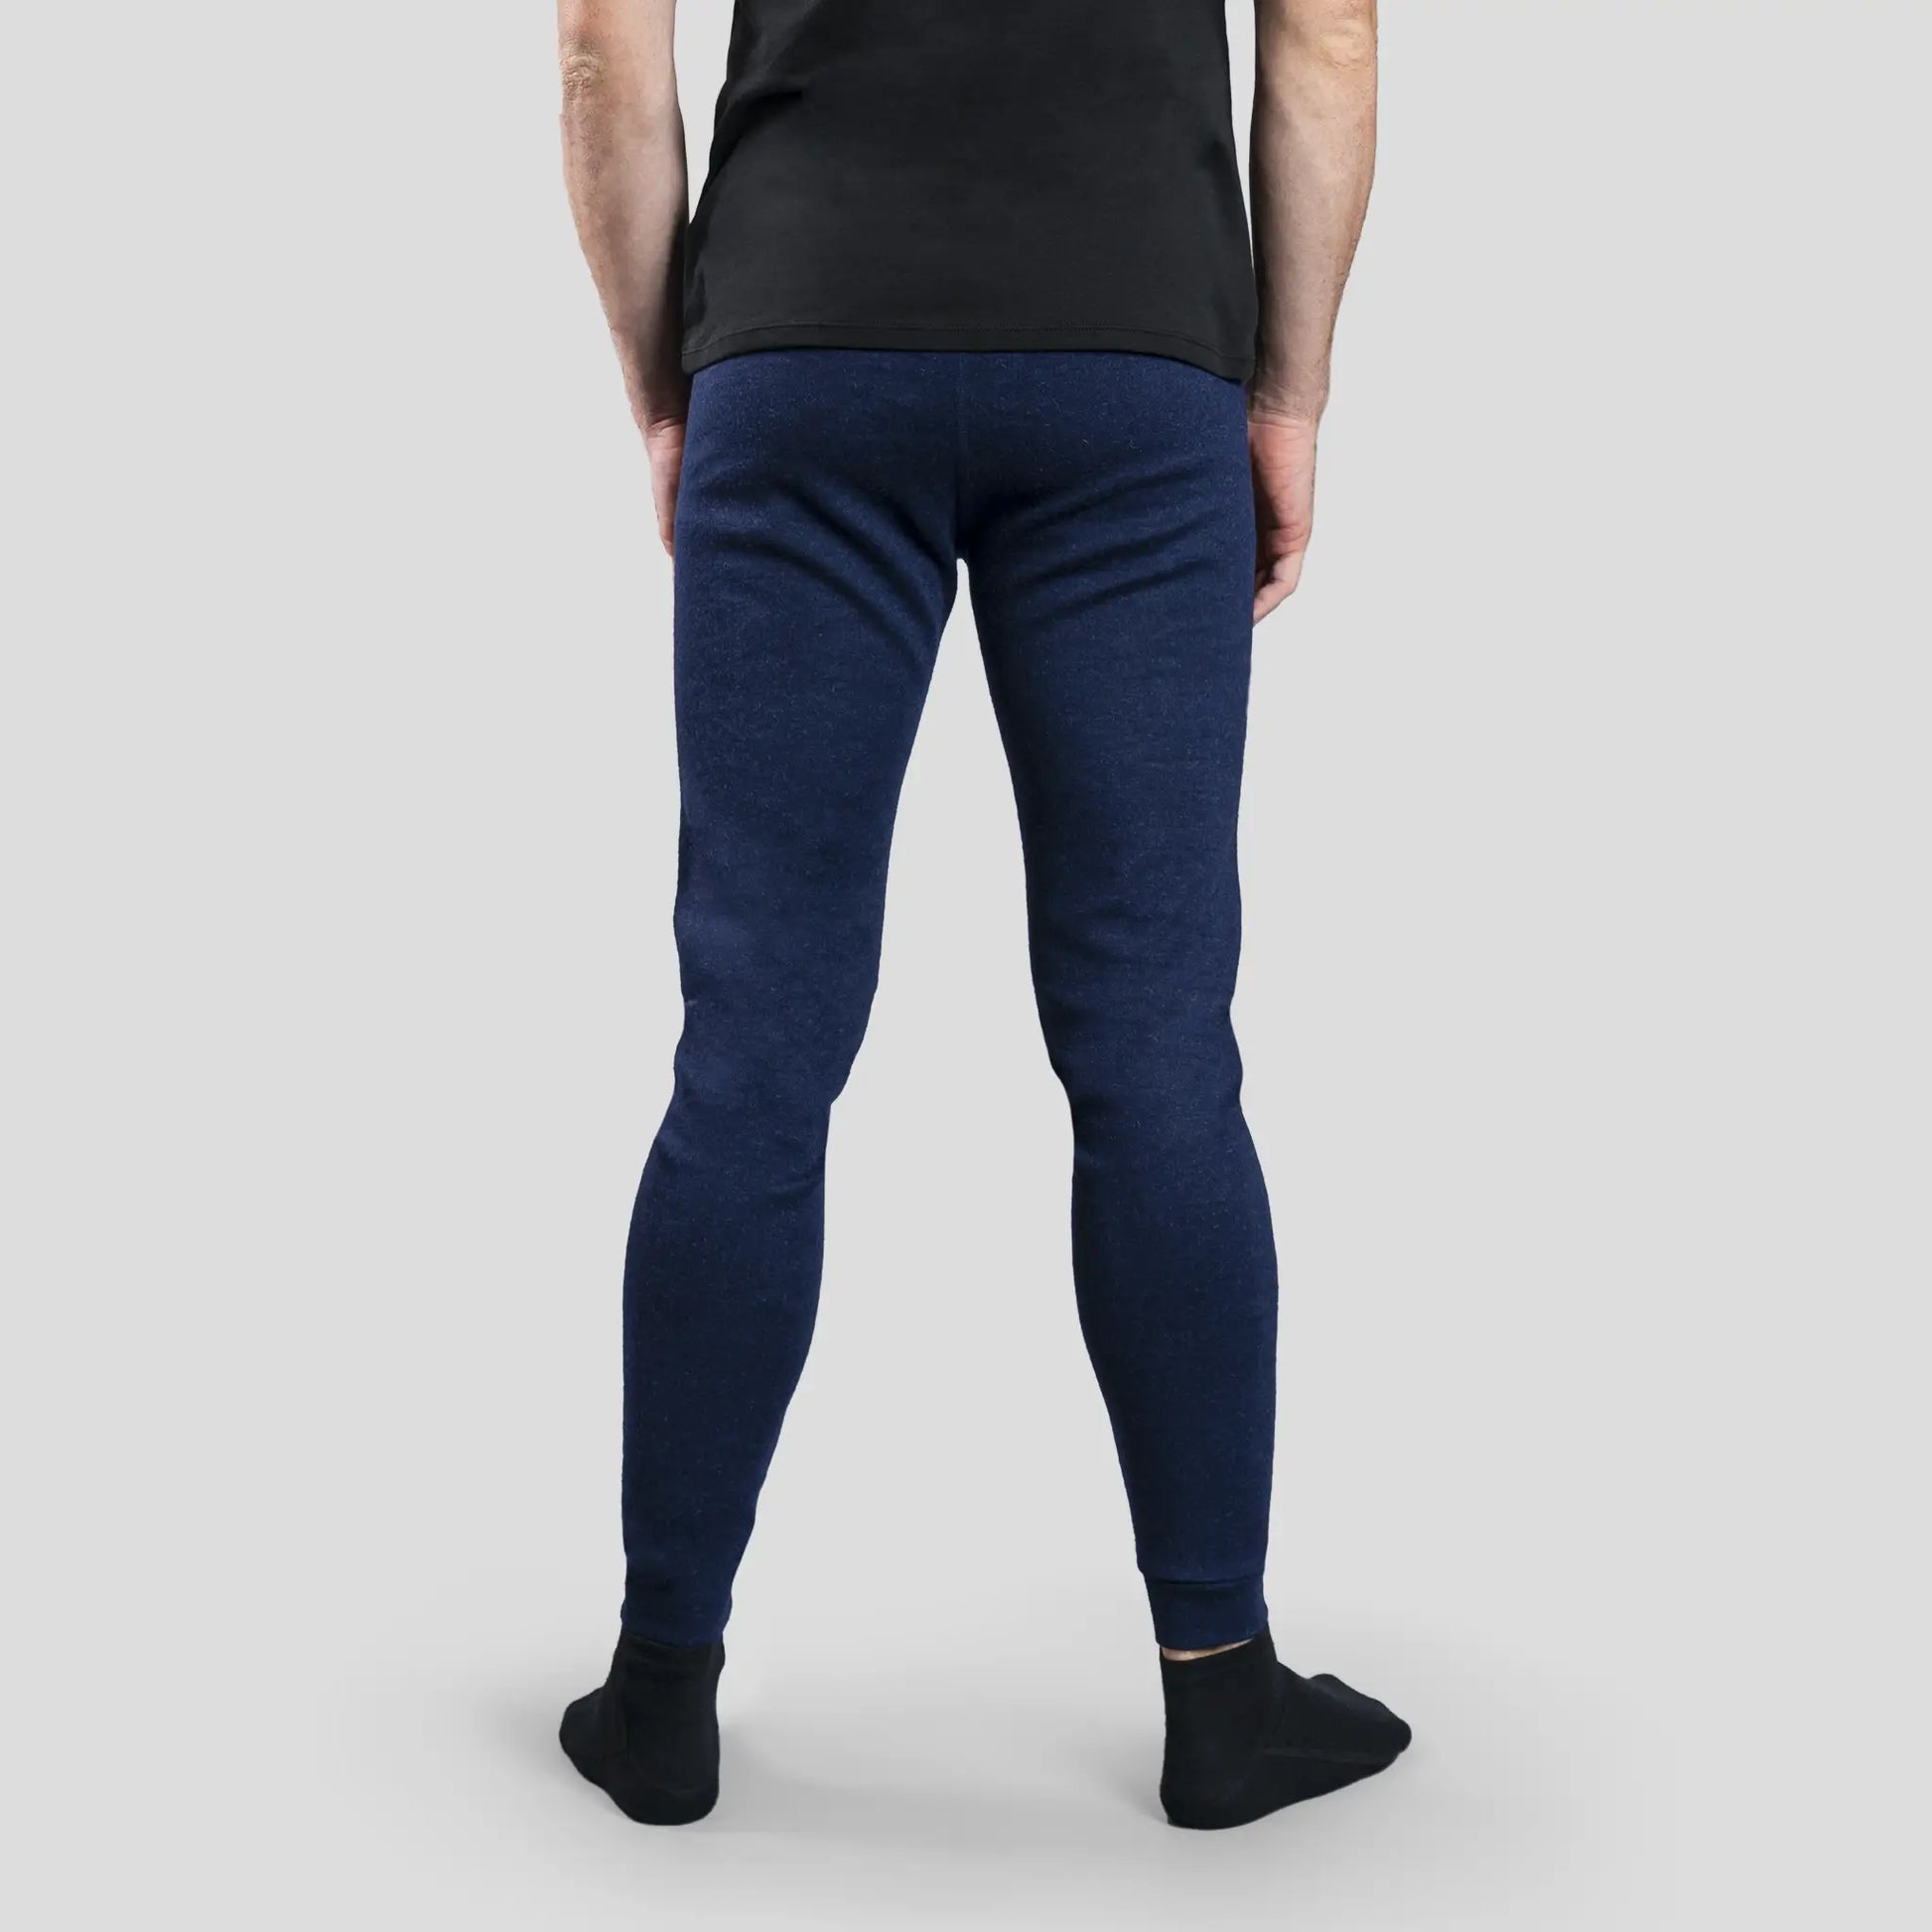 mens all natural sweatpants midweight color navy blue